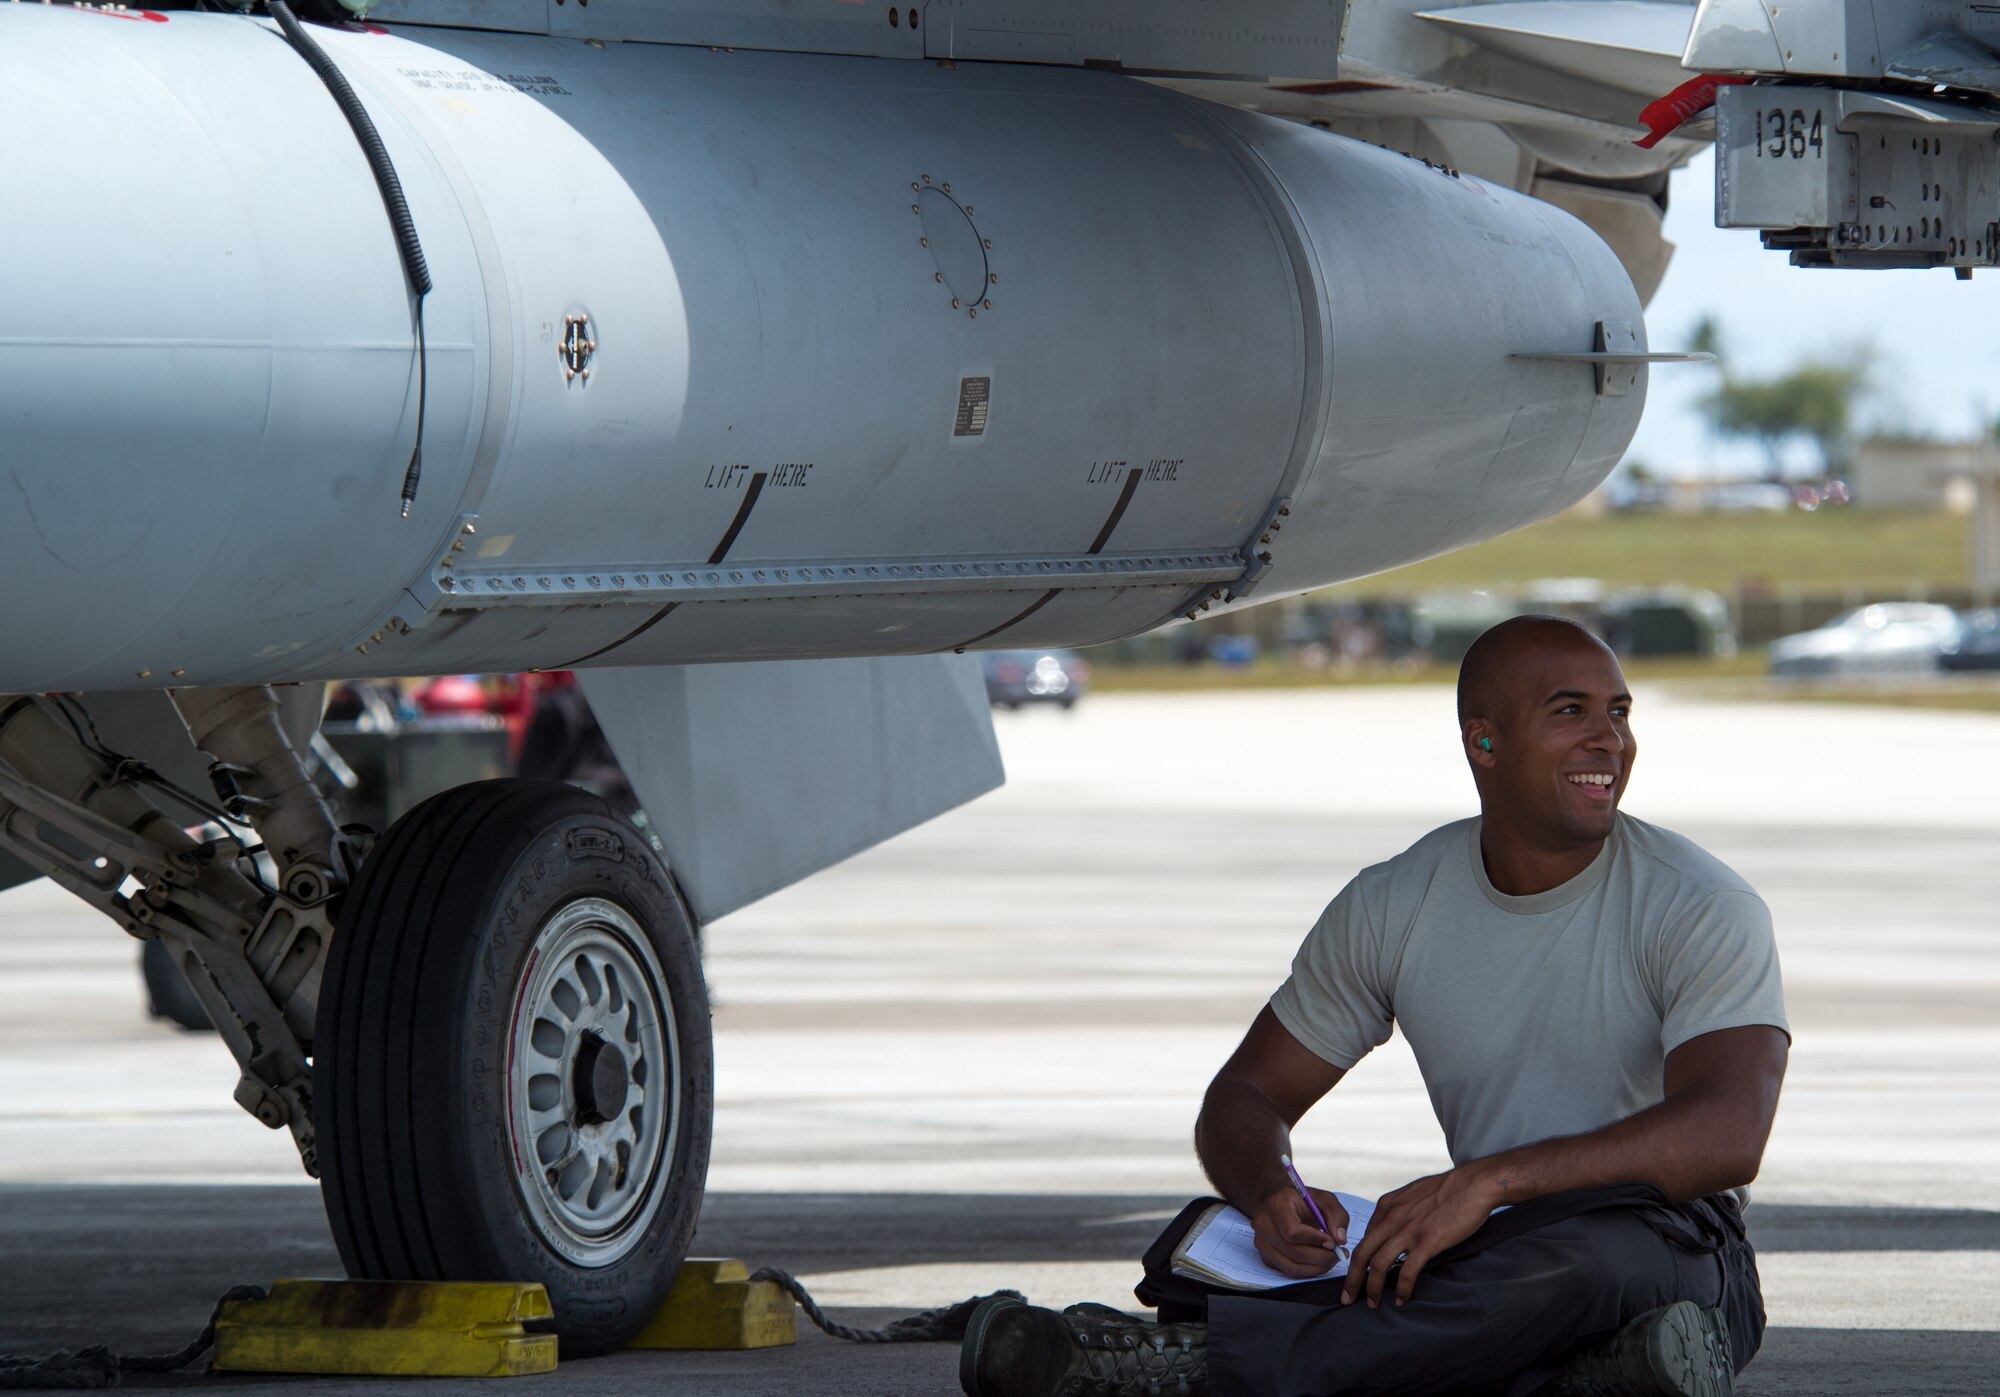 The 14th FS and AMU work out of Guam during exercise COPE NORTH.